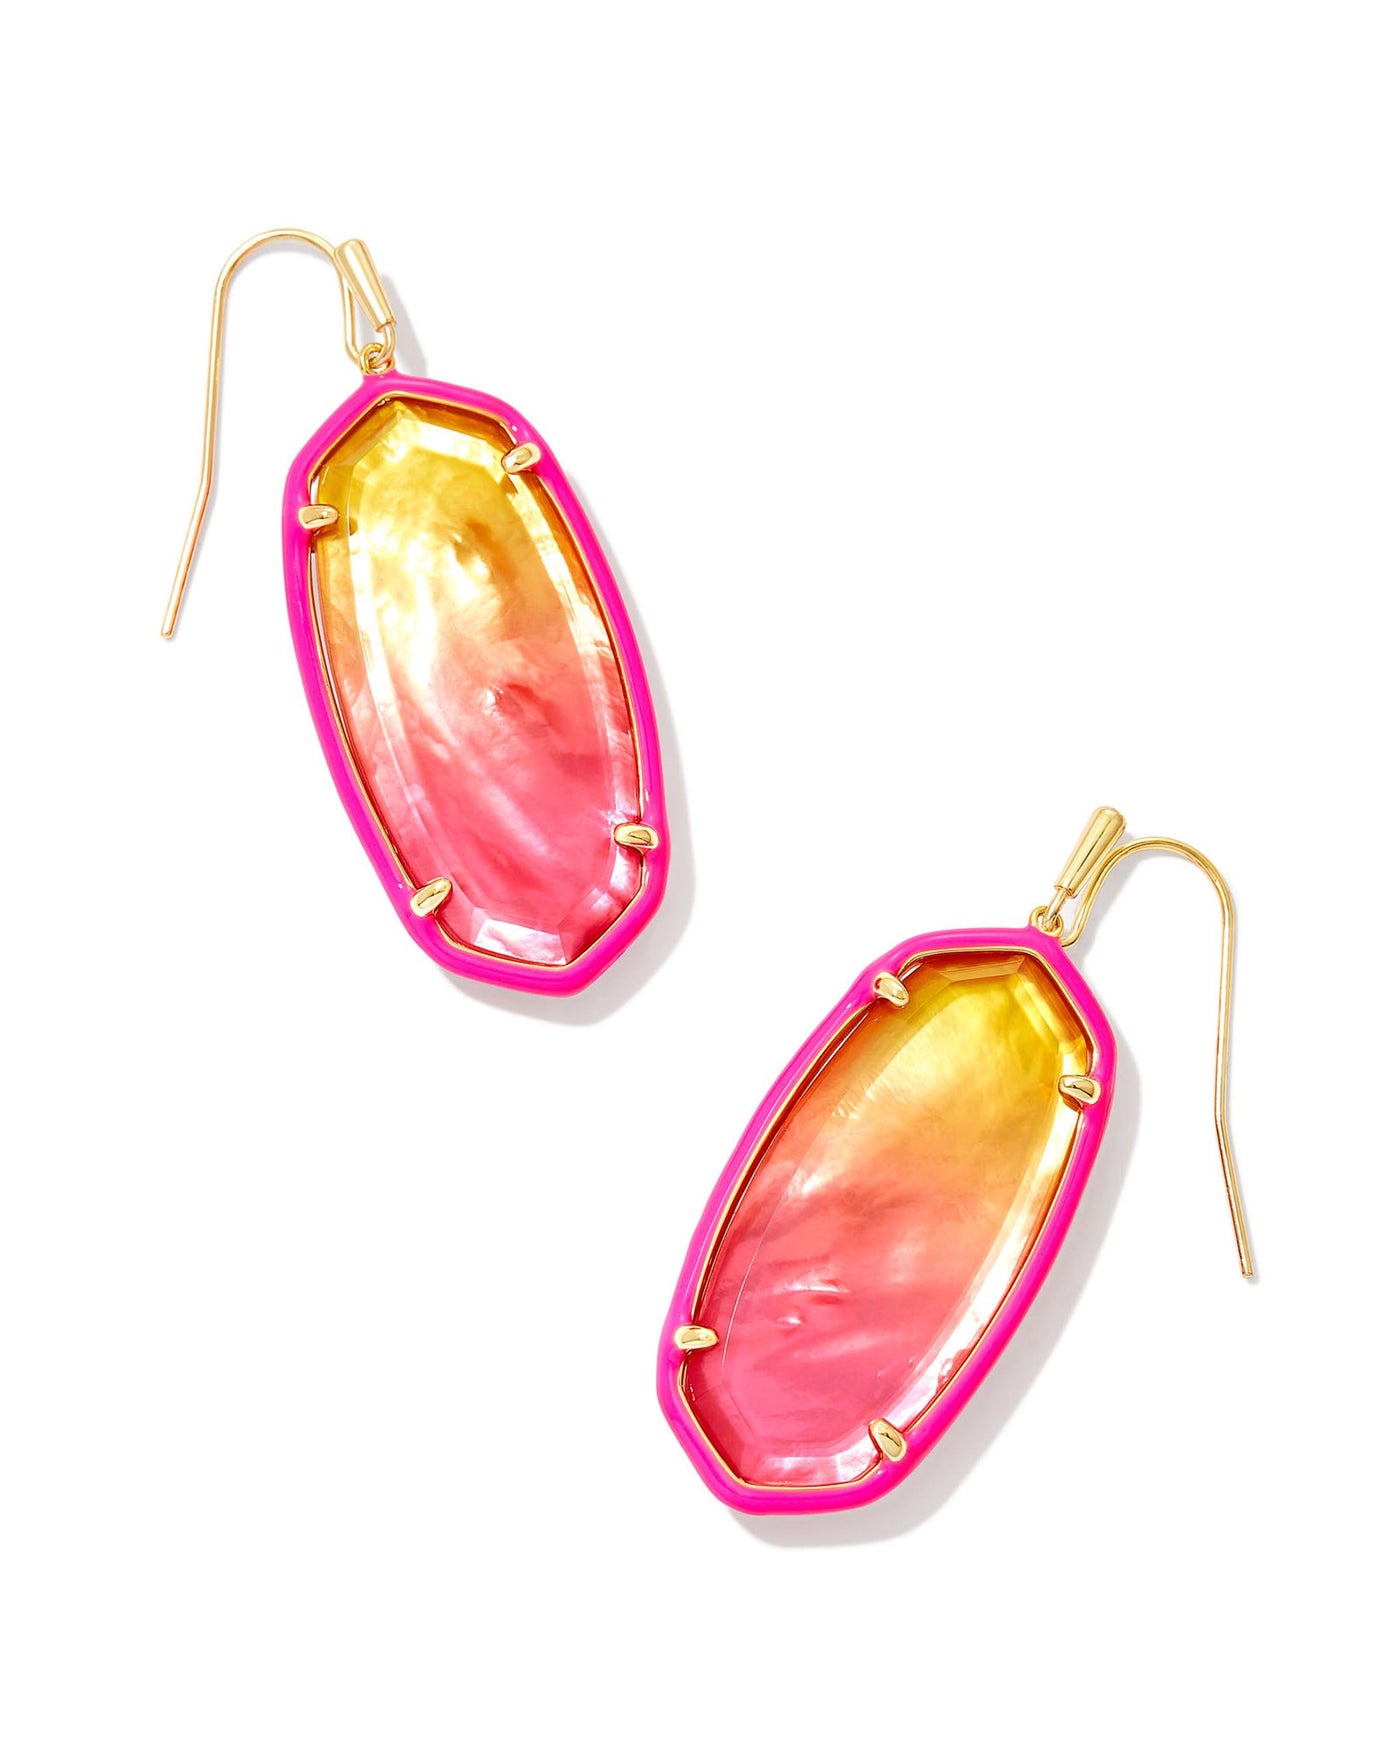 Gold Tone Earrings Featuring Sunset Ombre Illusion by Kendra Scott